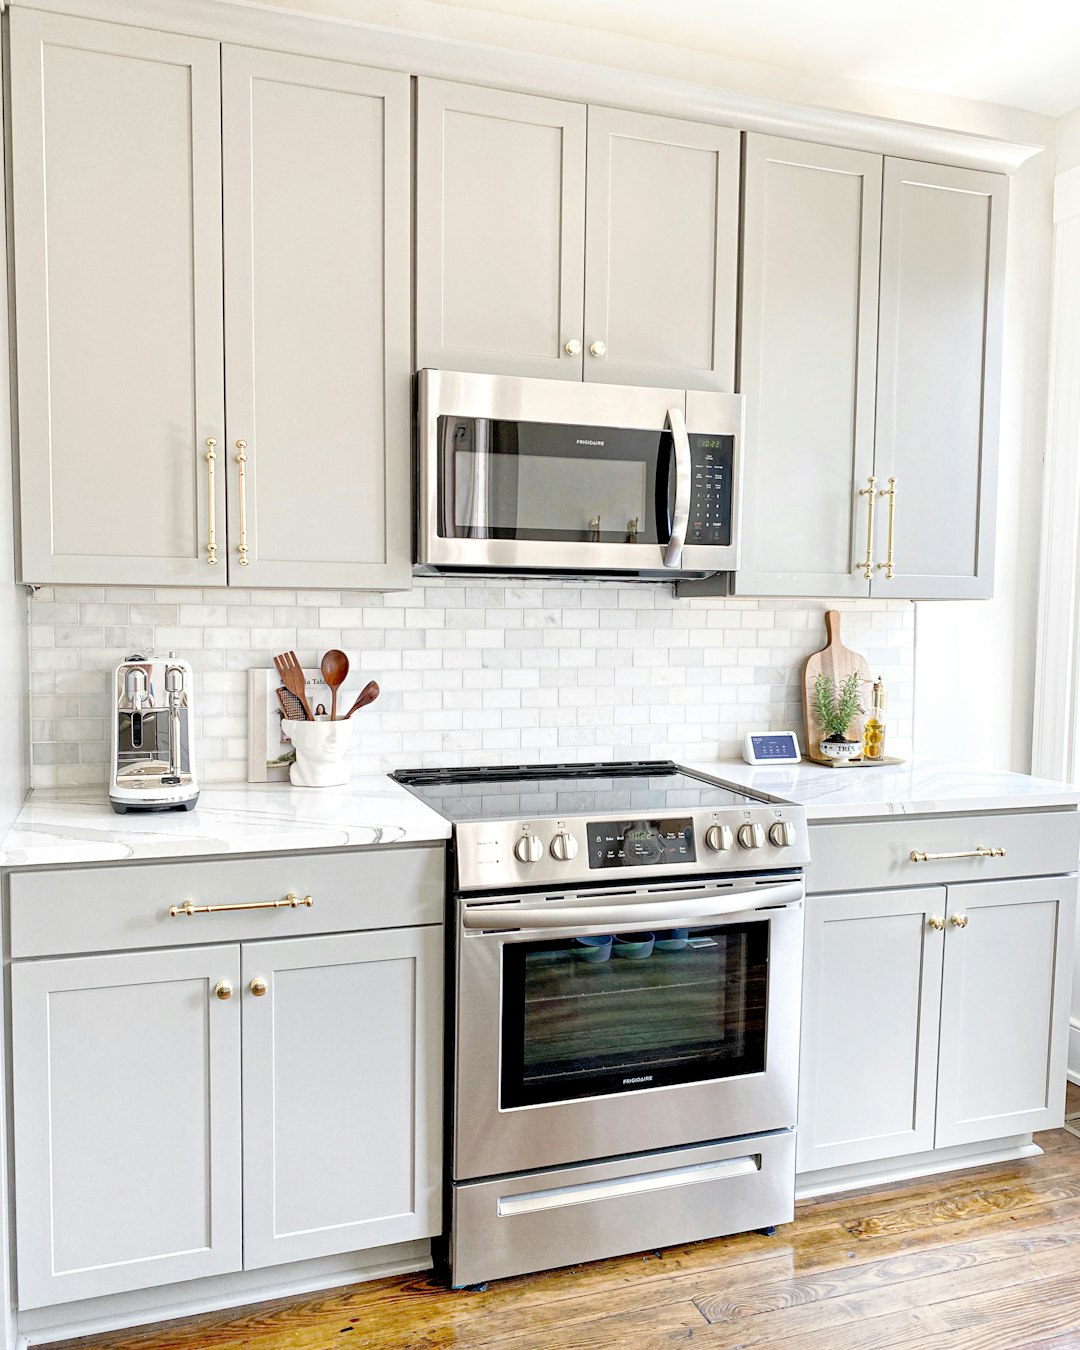  white microwave oven on white wooden cabinet oven